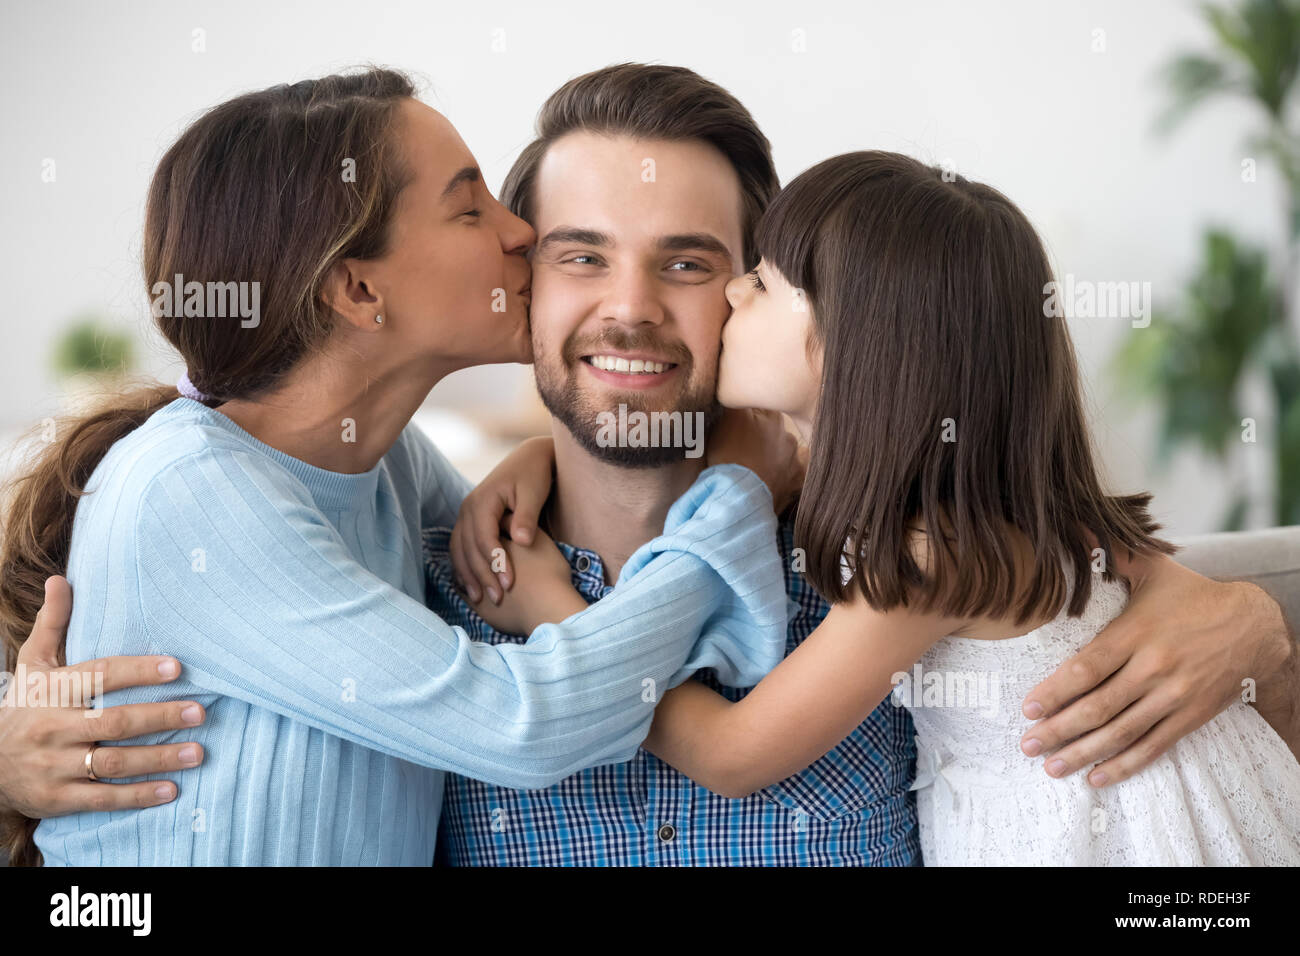 Kid daughter and wife embracing kissing happy father on cheeks Stock Photo